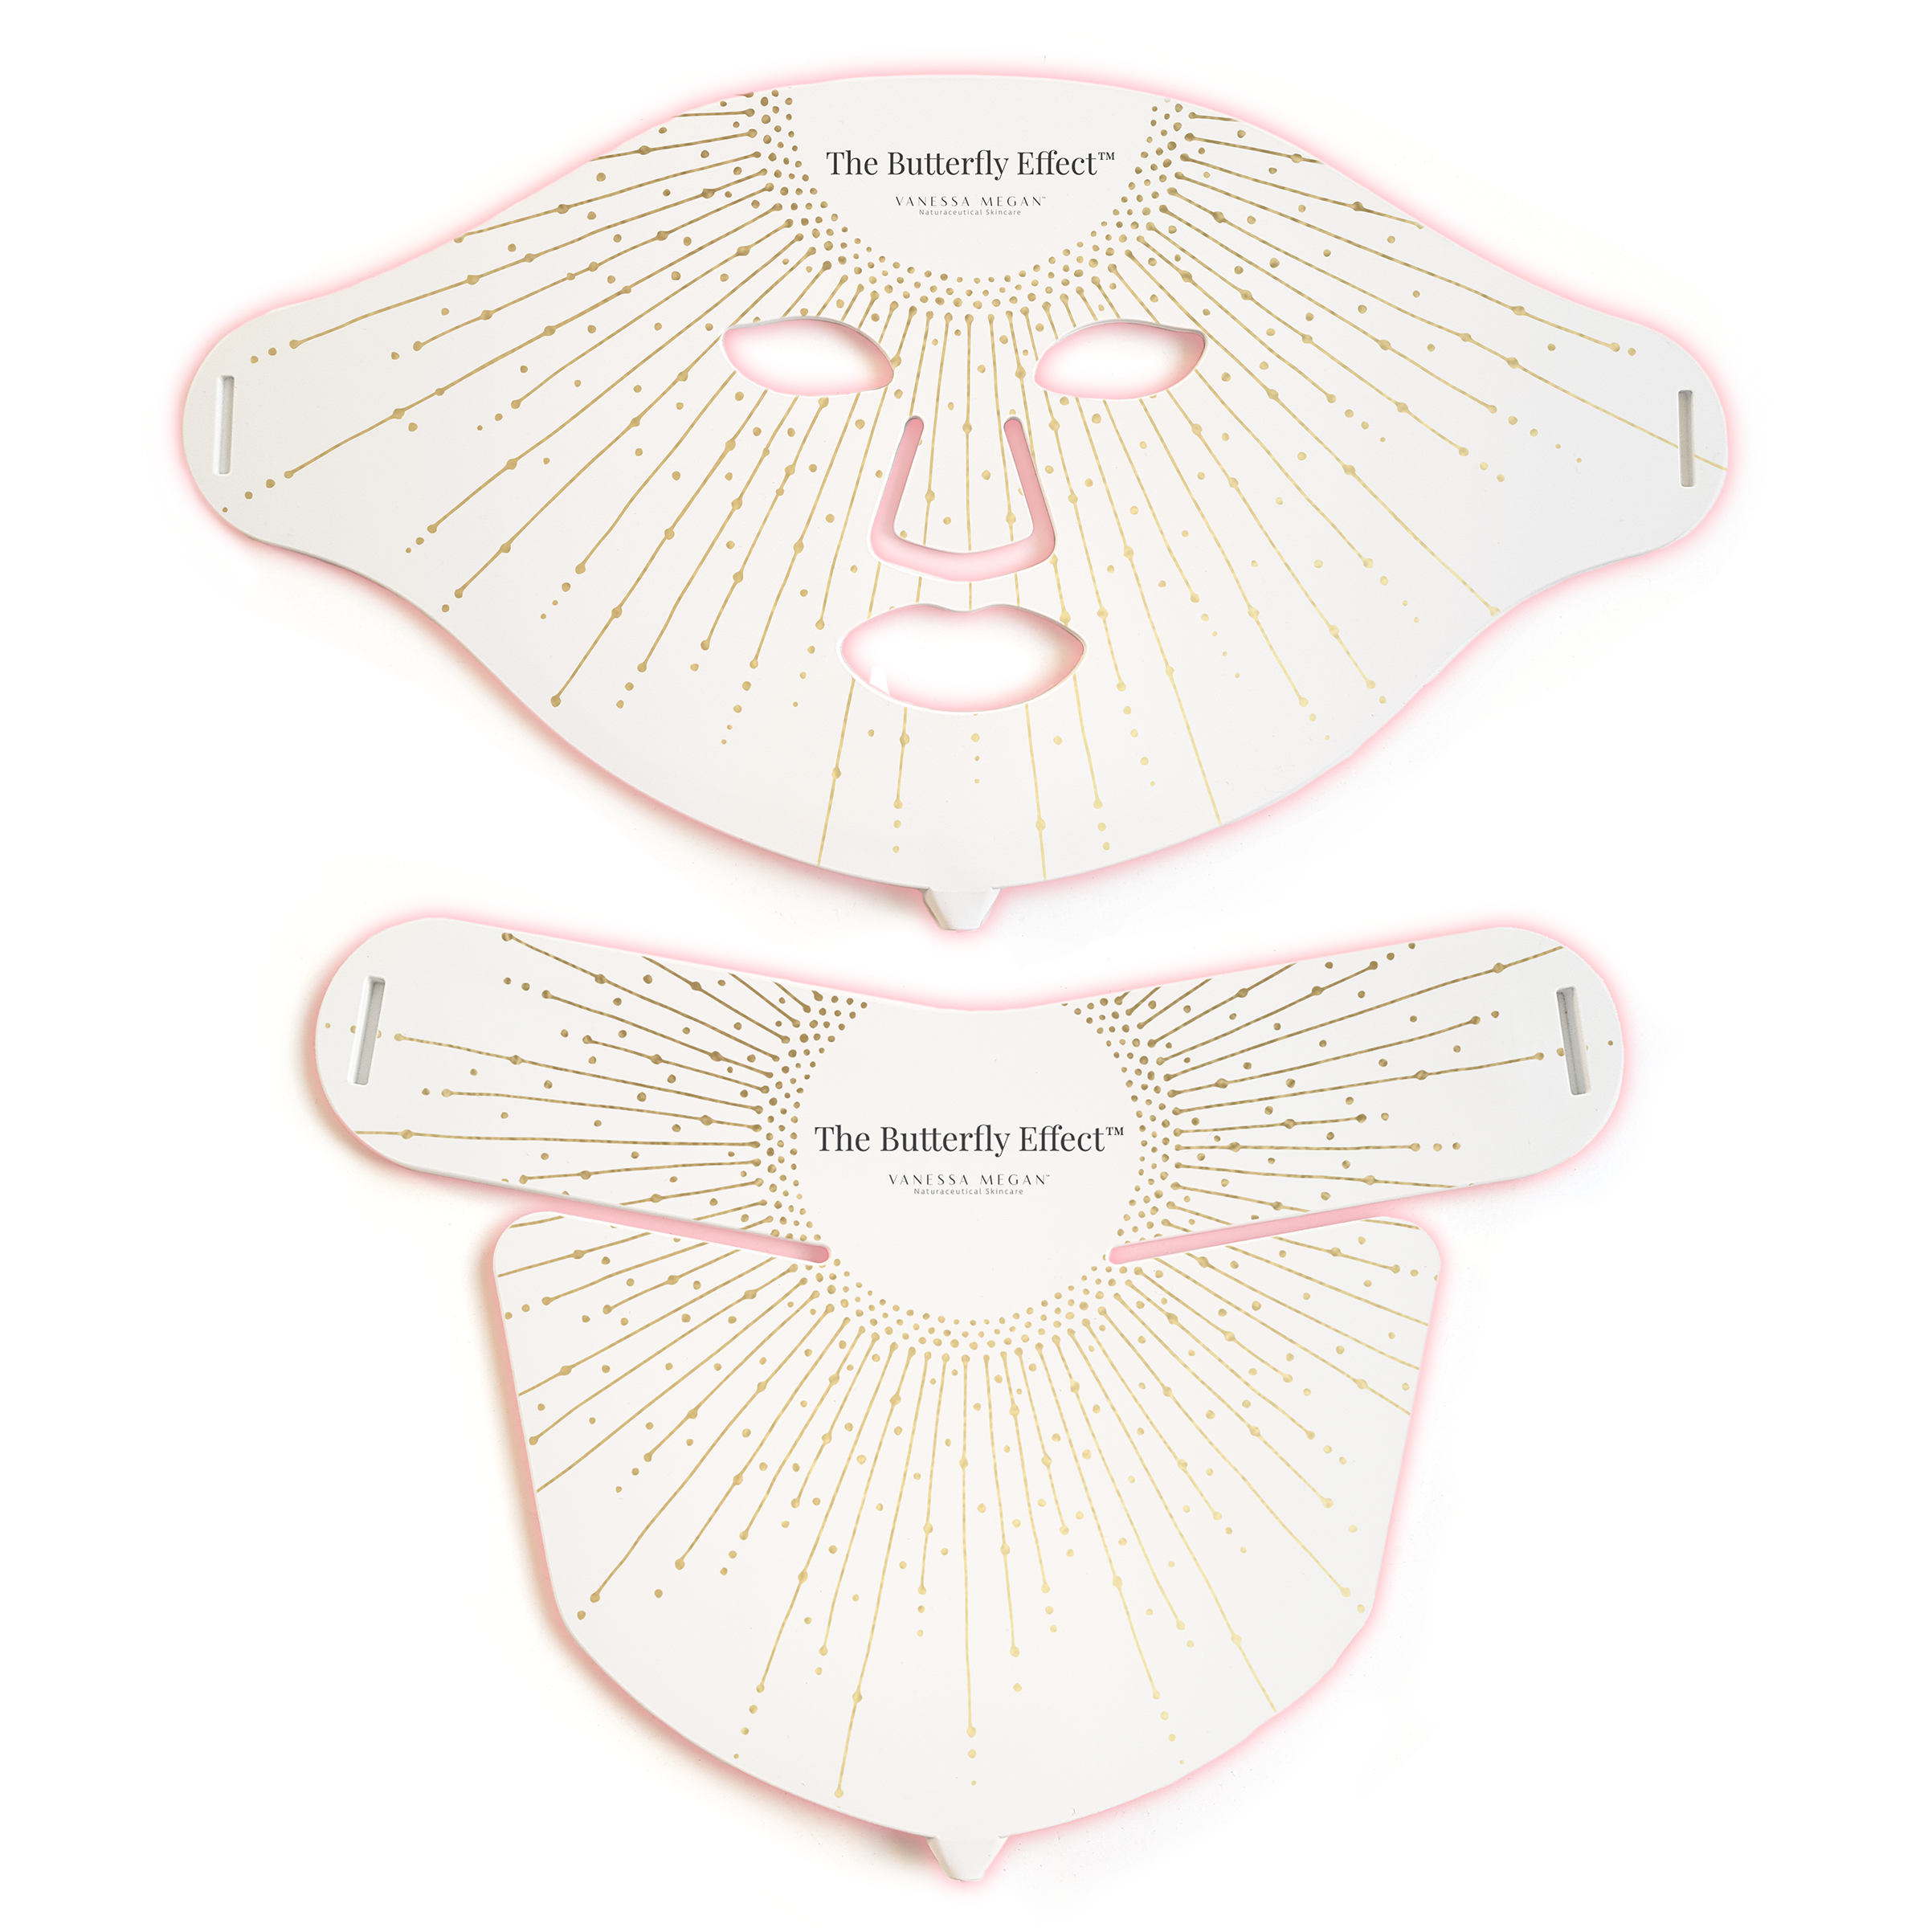 The Butterfly Effect™ Medical-Grade Silicone LED Mask